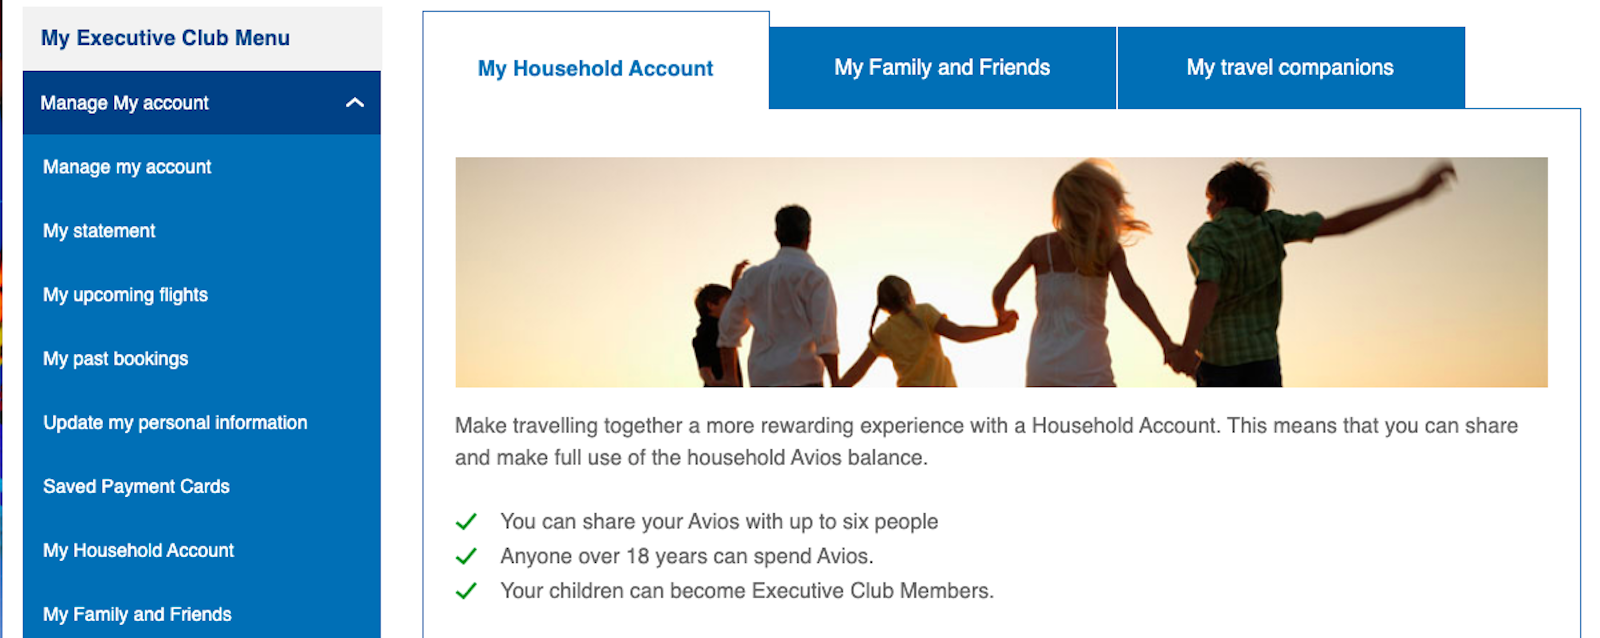 Screenshot of page where you can start a British Airways household account